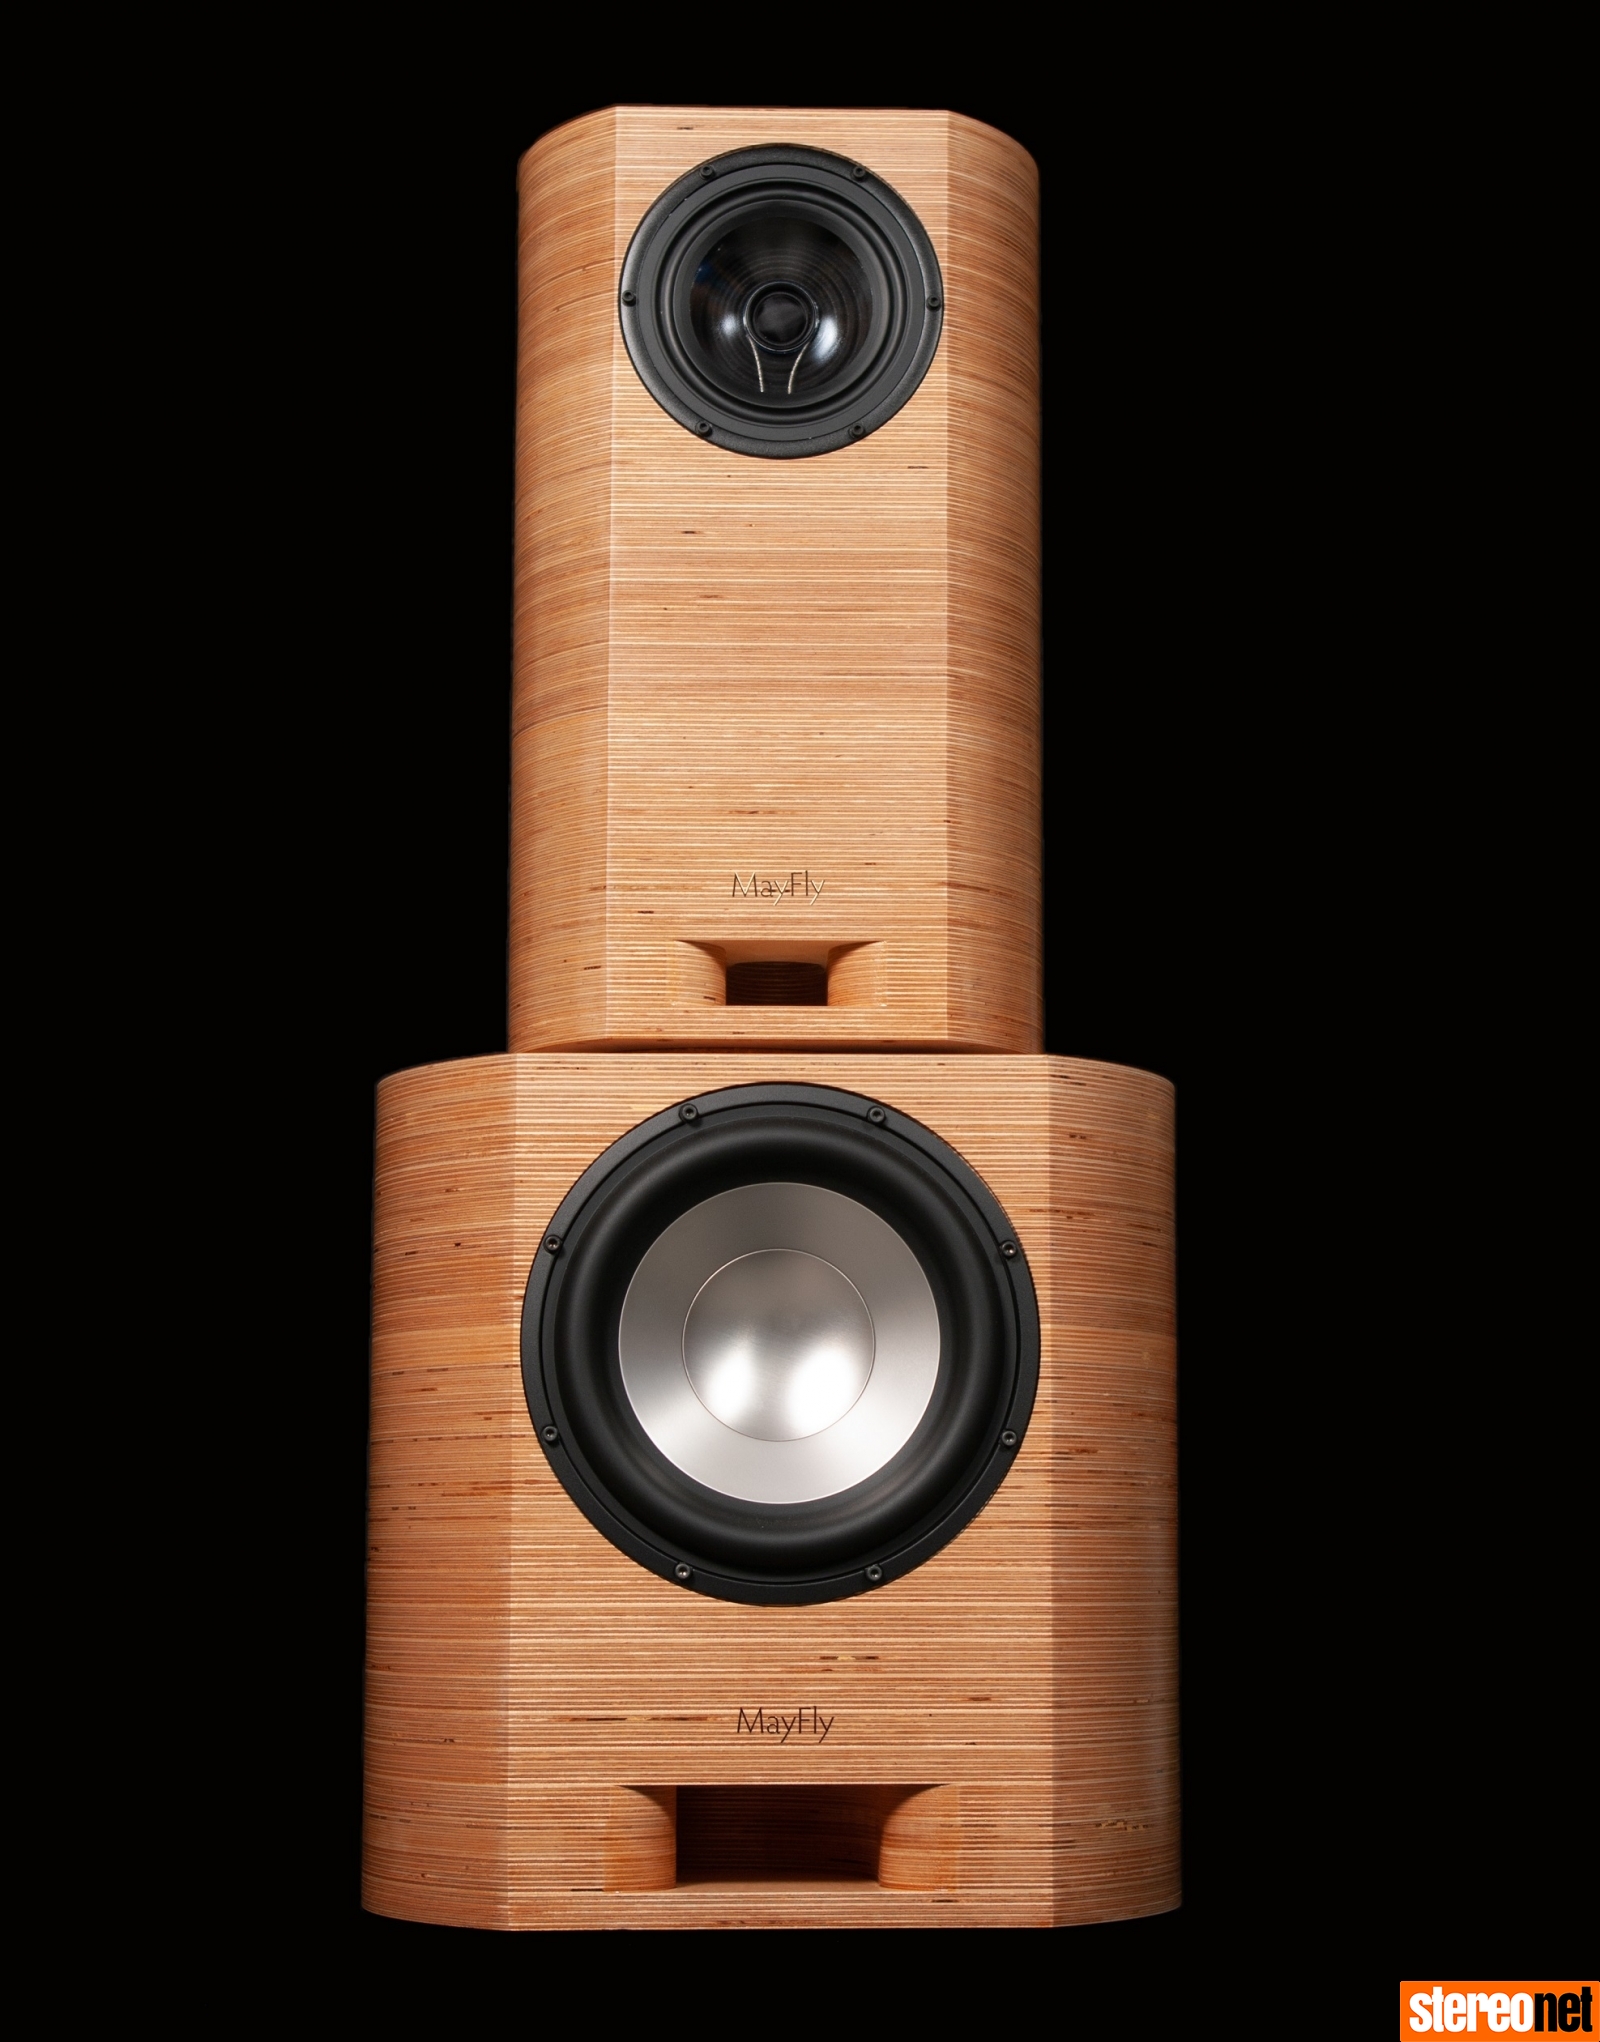 Mayfly Audio Systems speakers